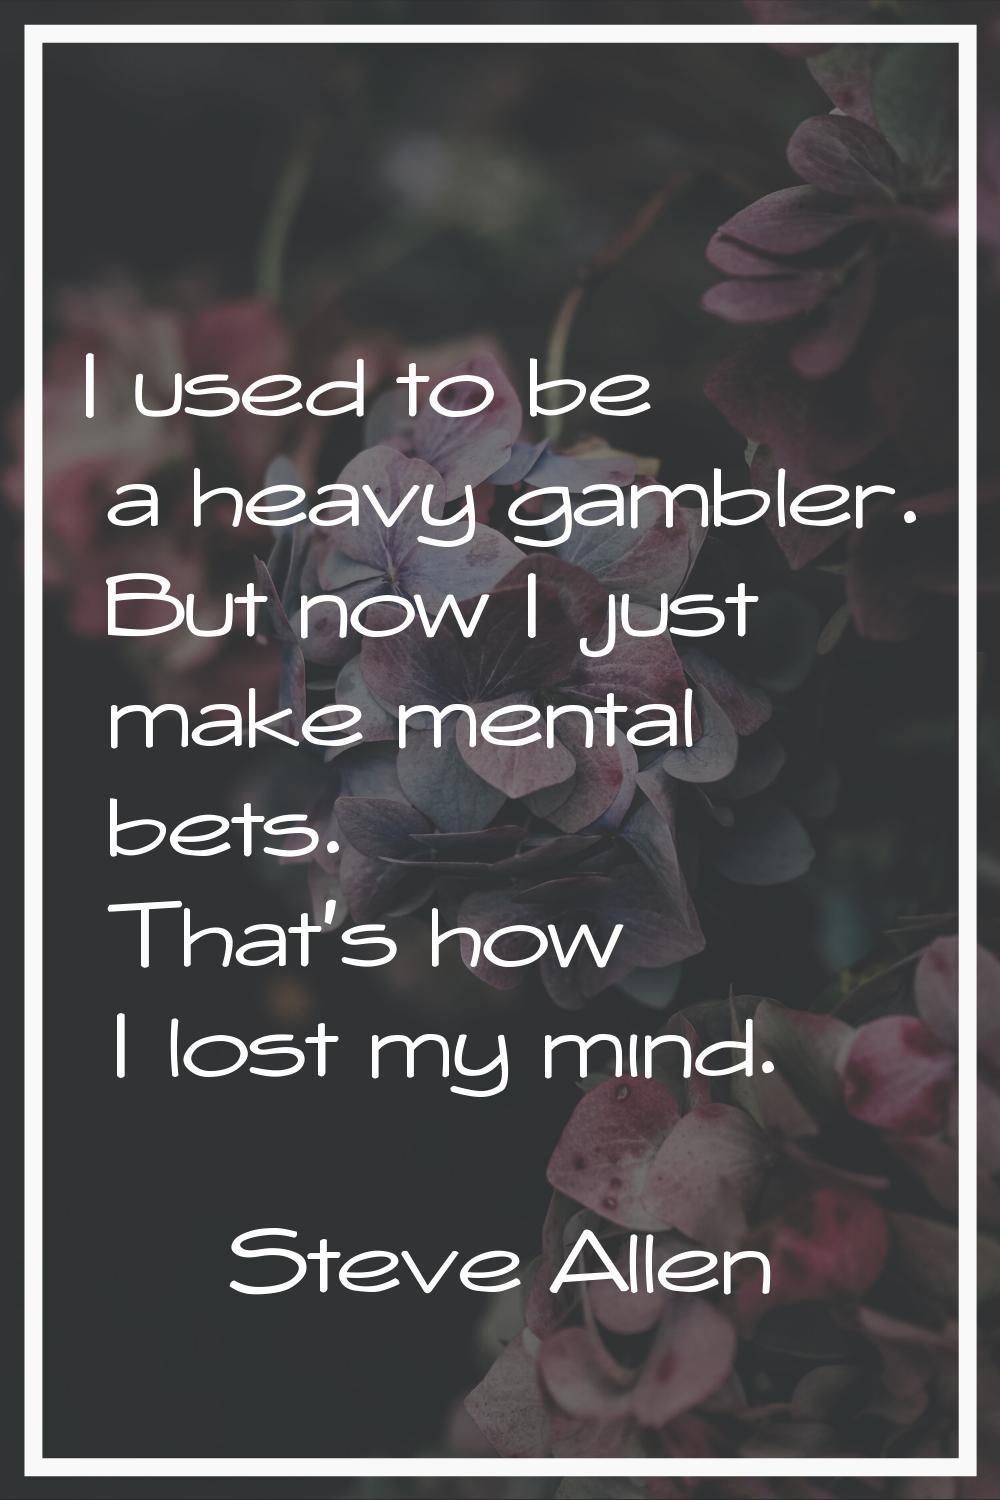 I used to be a heavy gambler. But now I just make mental bets. That's how I lost my mind.